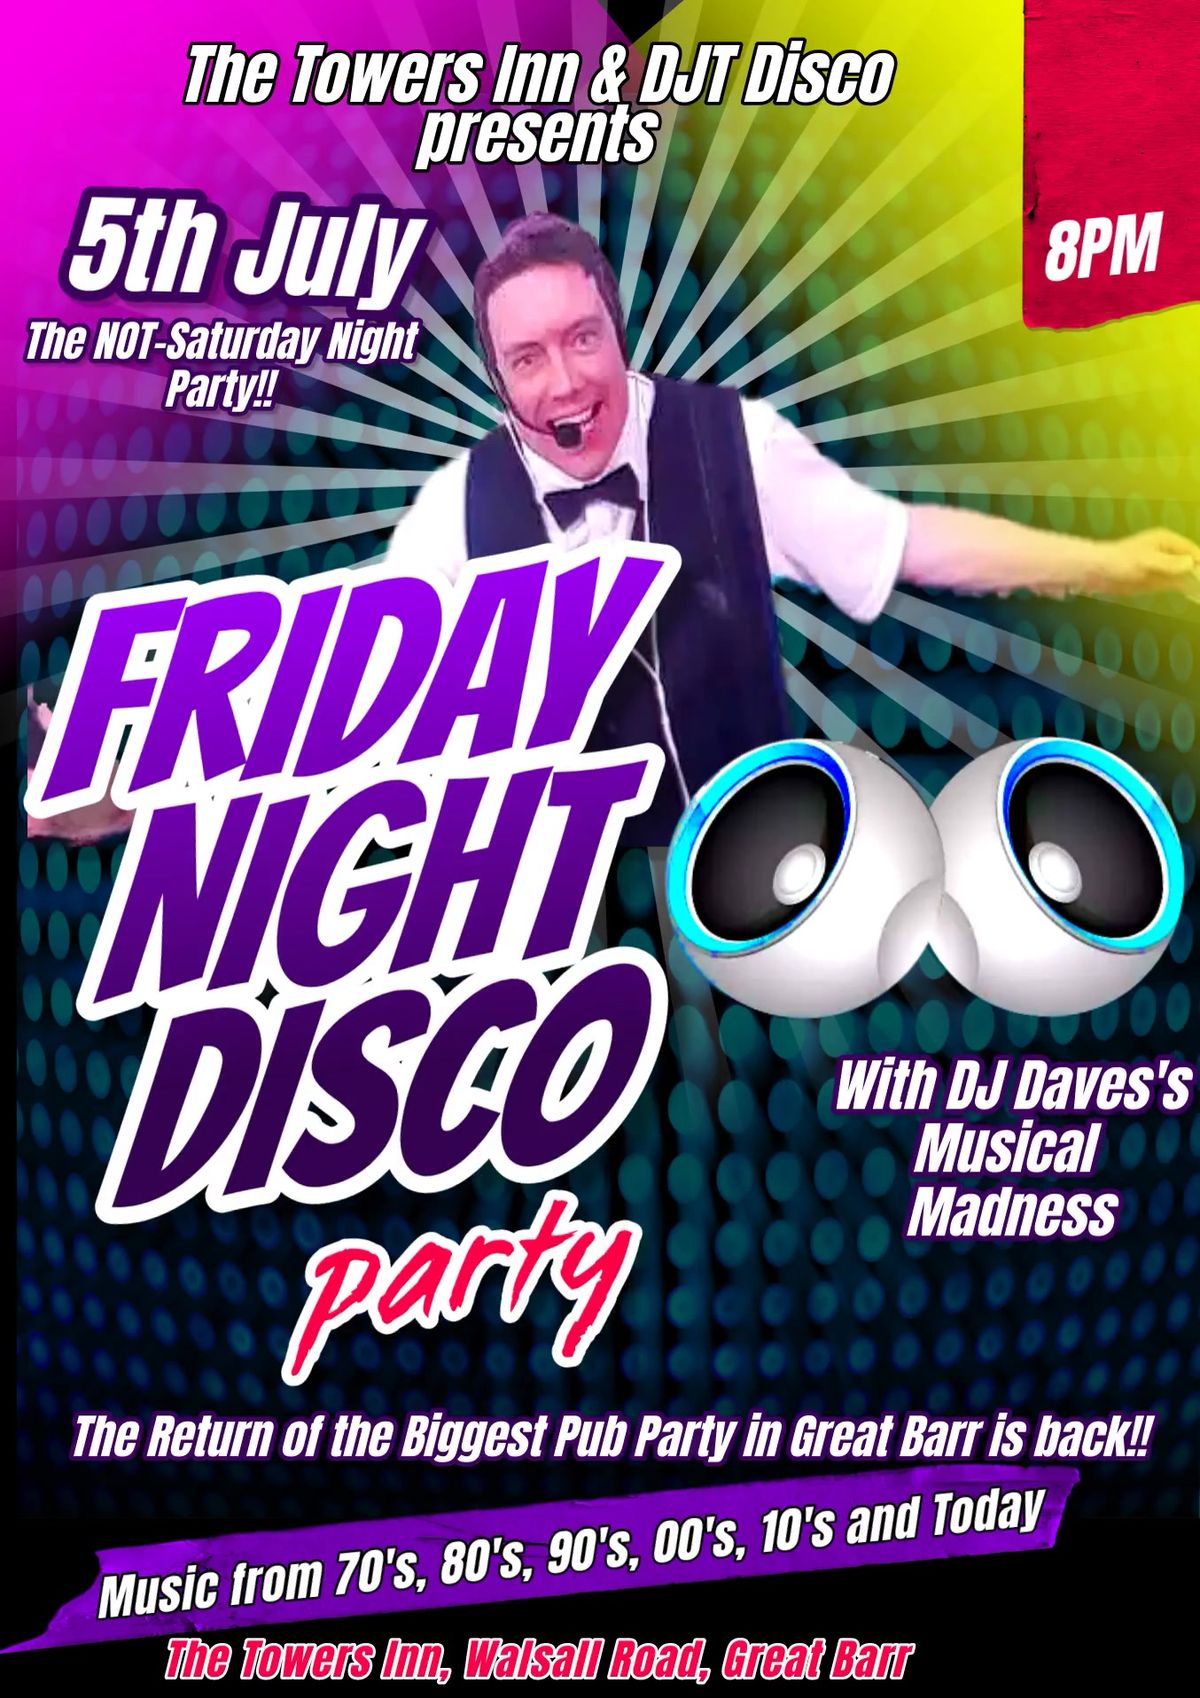 Towers NOT-Saturday-Its Friday Night Party with DJ Dave